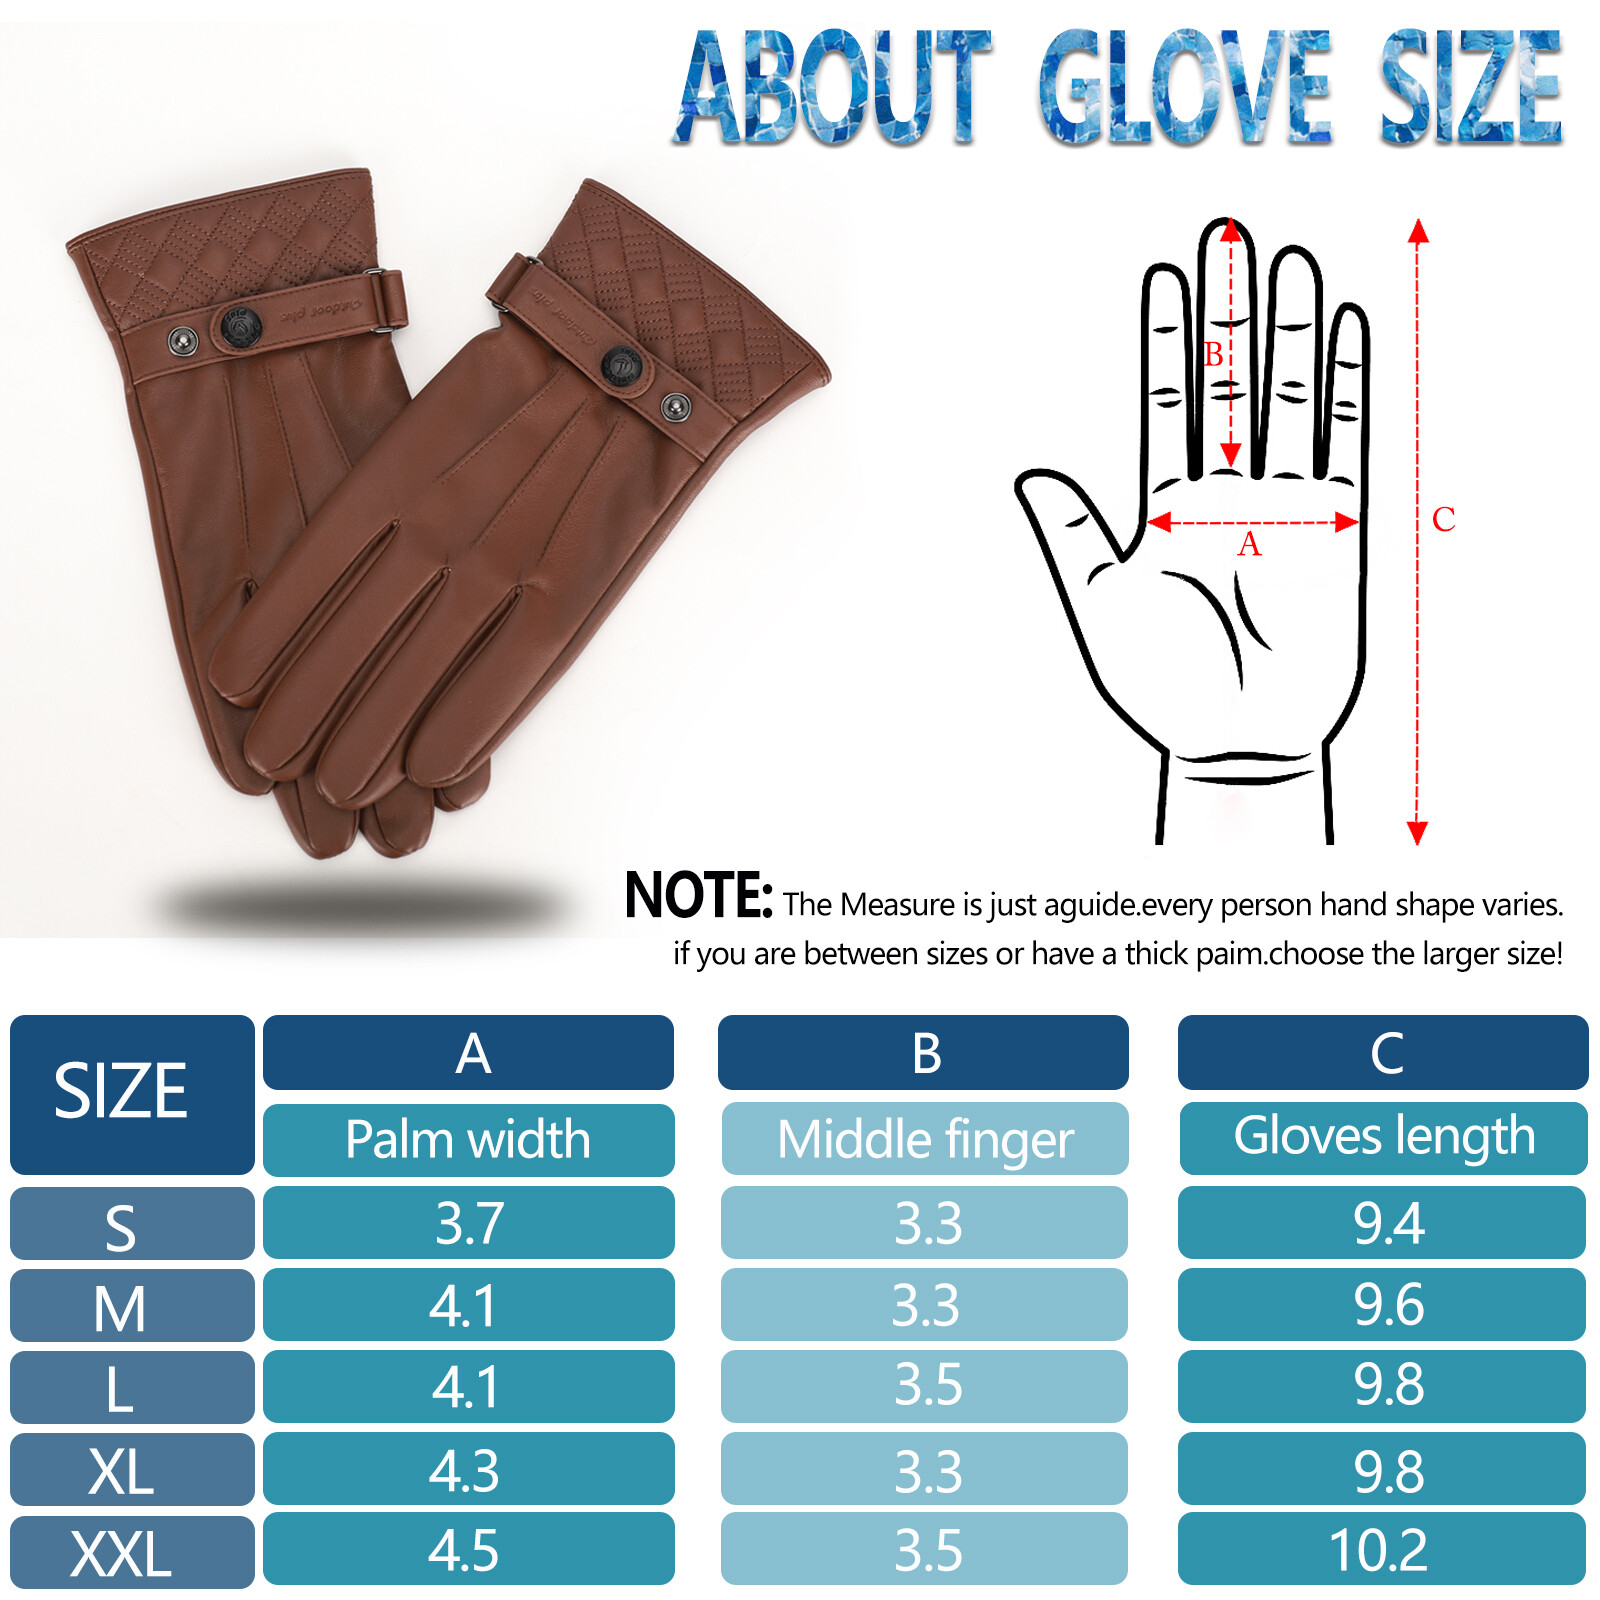 Leather Gloves for Men, Warm Wool Lined PU Leather Winter Gloves Touchscreen Texting,Driving Gloves Men Waterproof - image 5 of 7